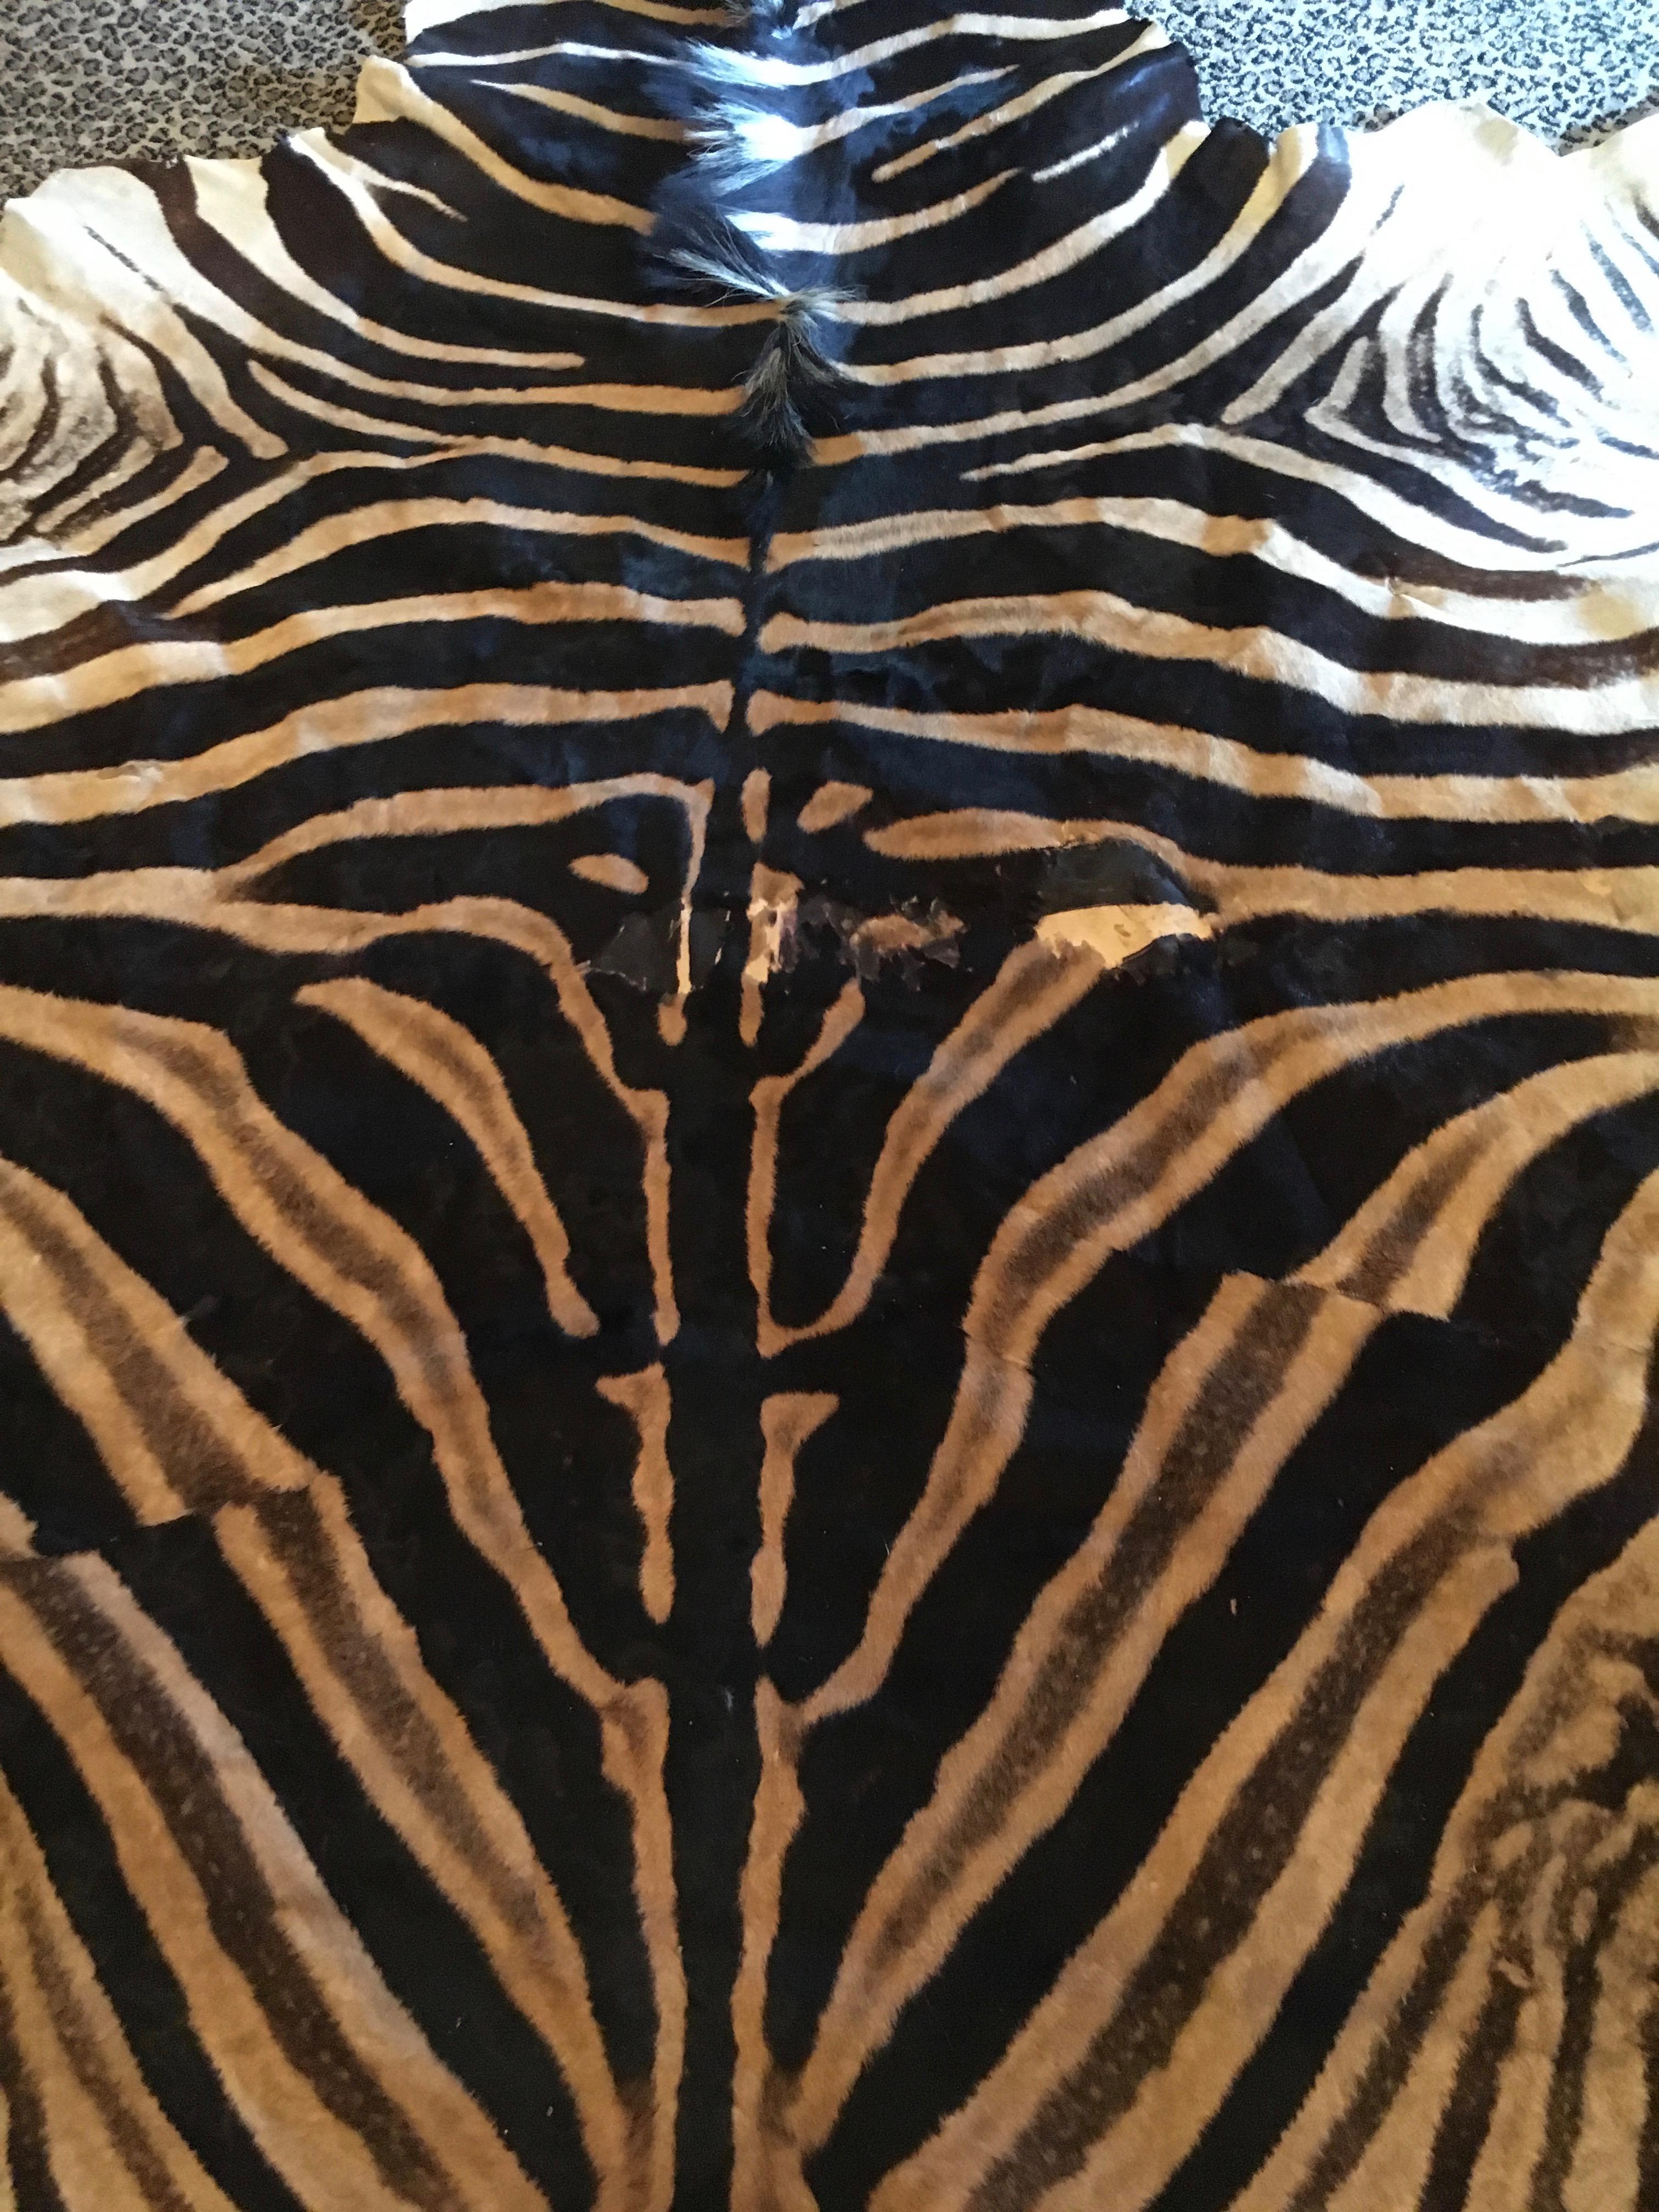 Handsome rug for any room or to use as upholstery or pillows - very large and in very good condition - Zebra rugs add depth and character to a room, the pattern is great way to add interest and intrigue into any environment.